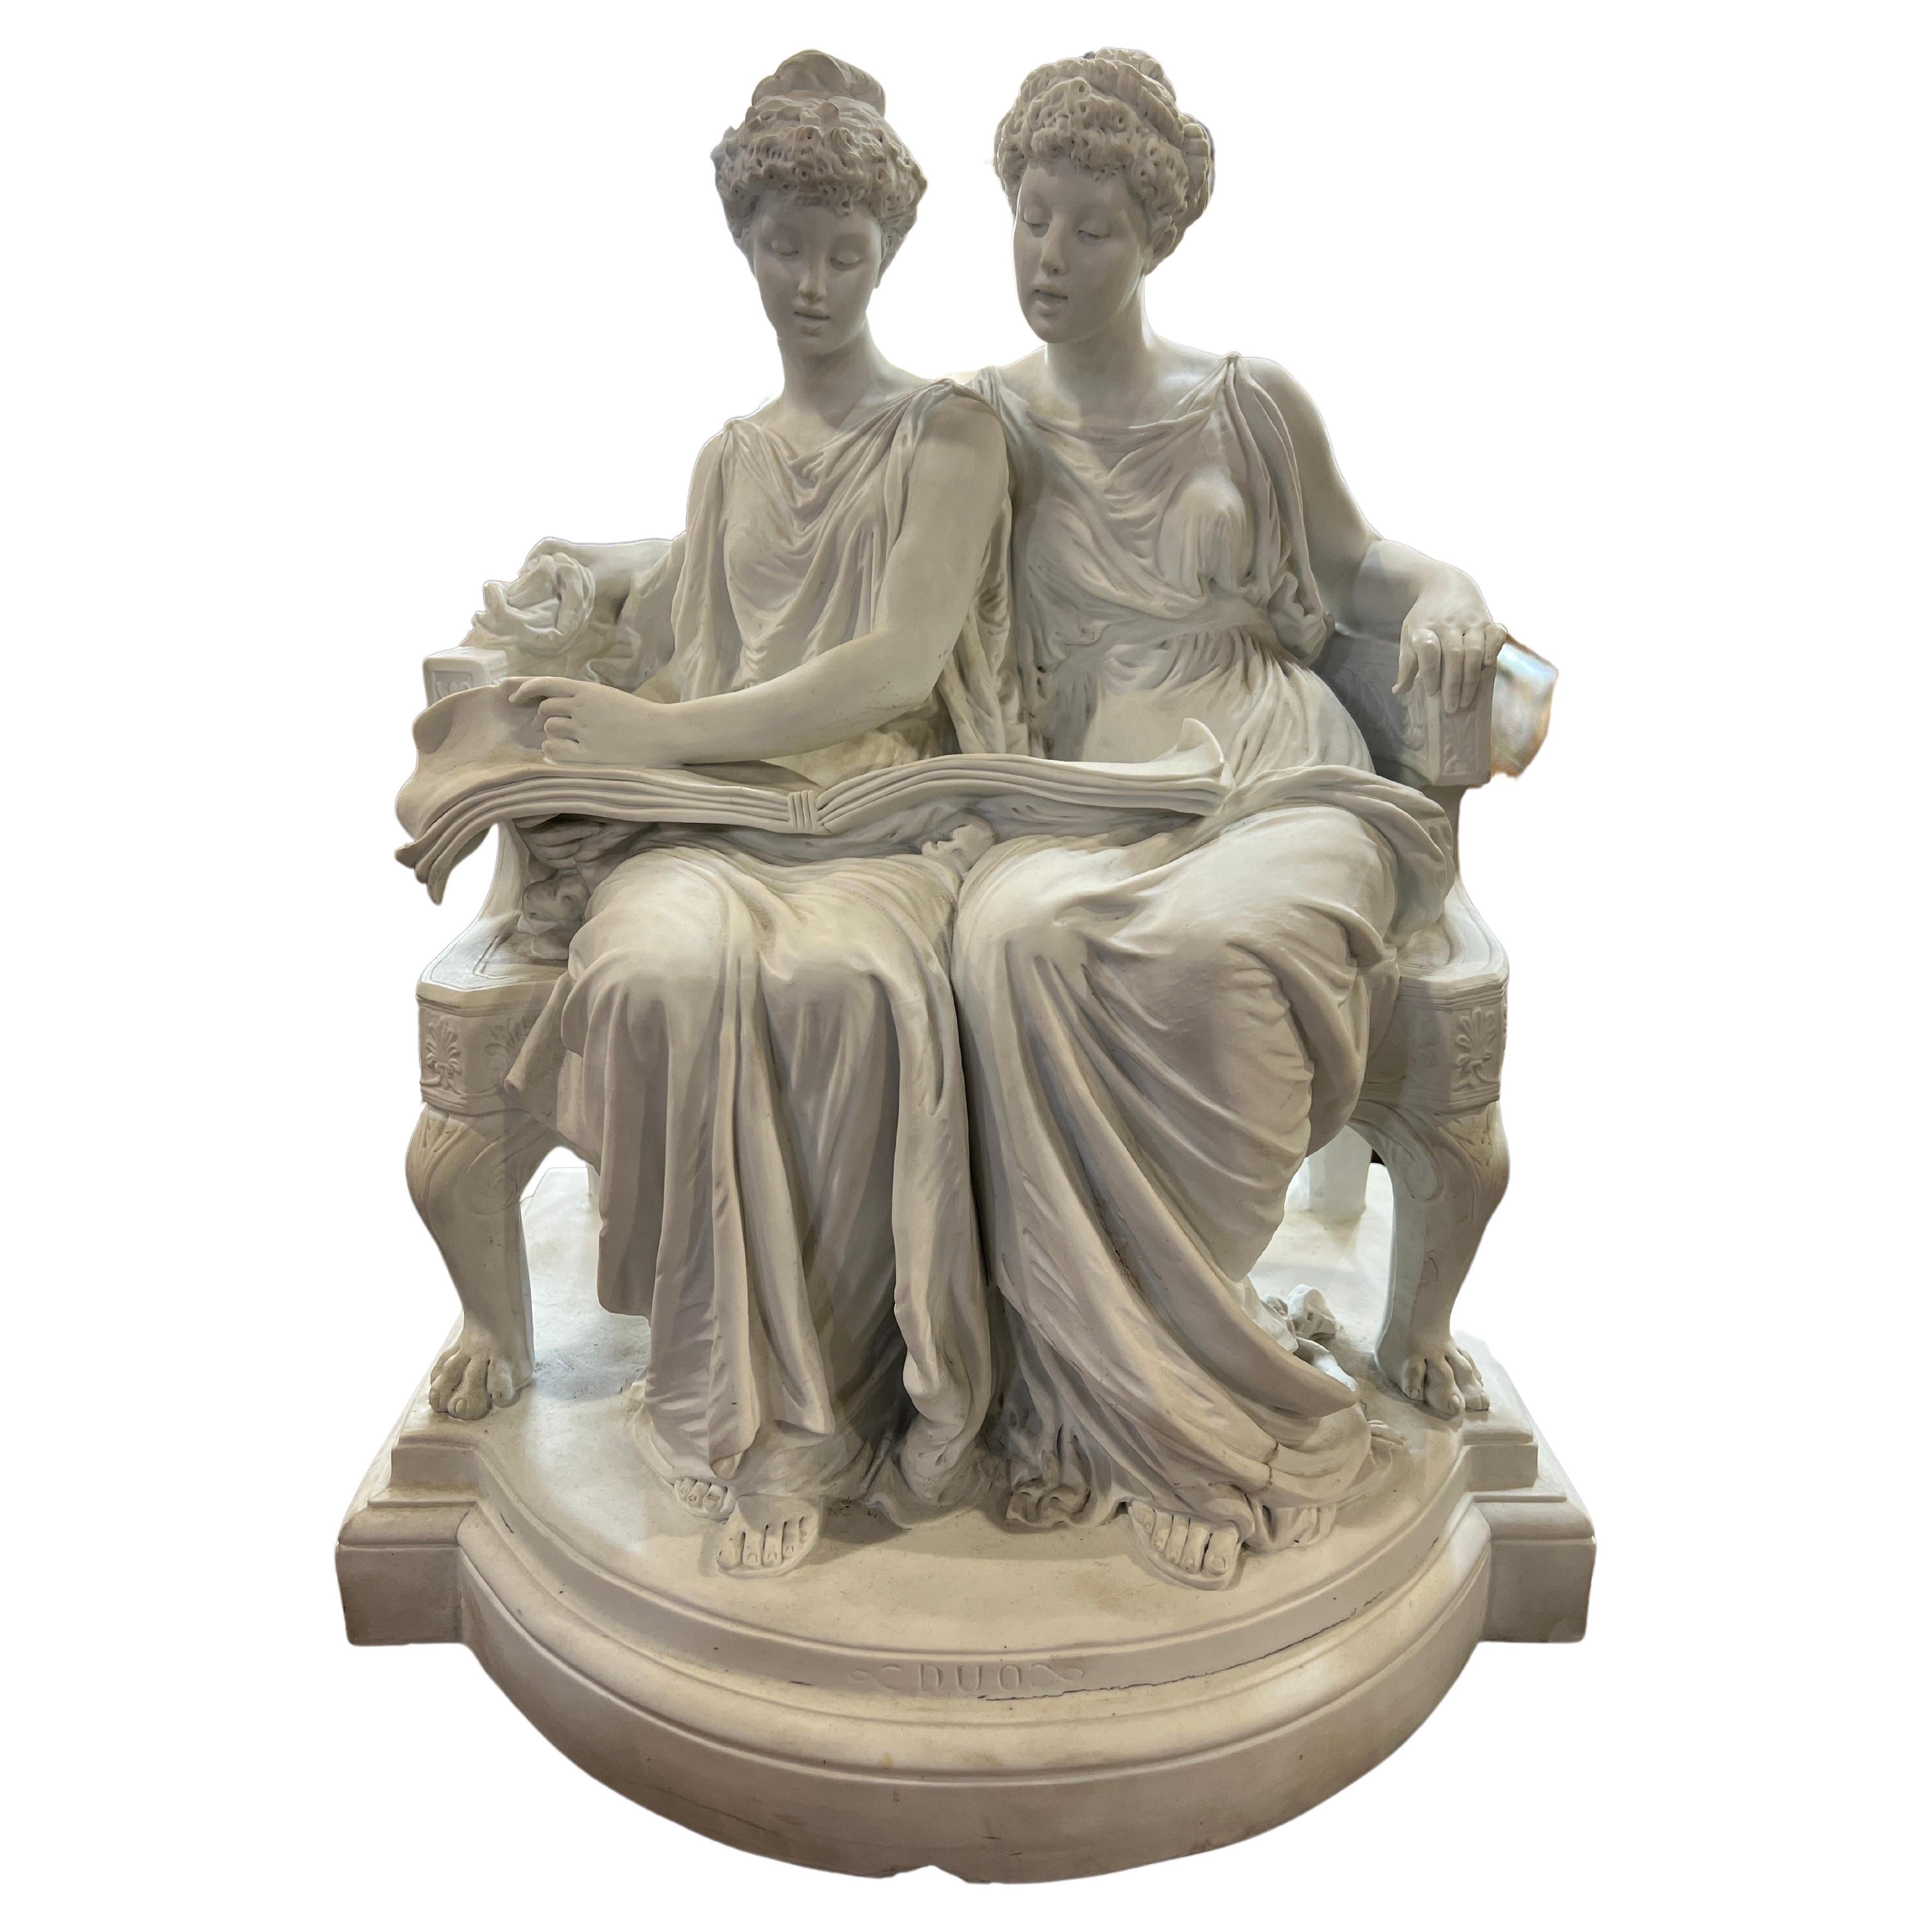 19th Century France Napoleon III Porcelain Biscuit Statue Entitled "Duo"